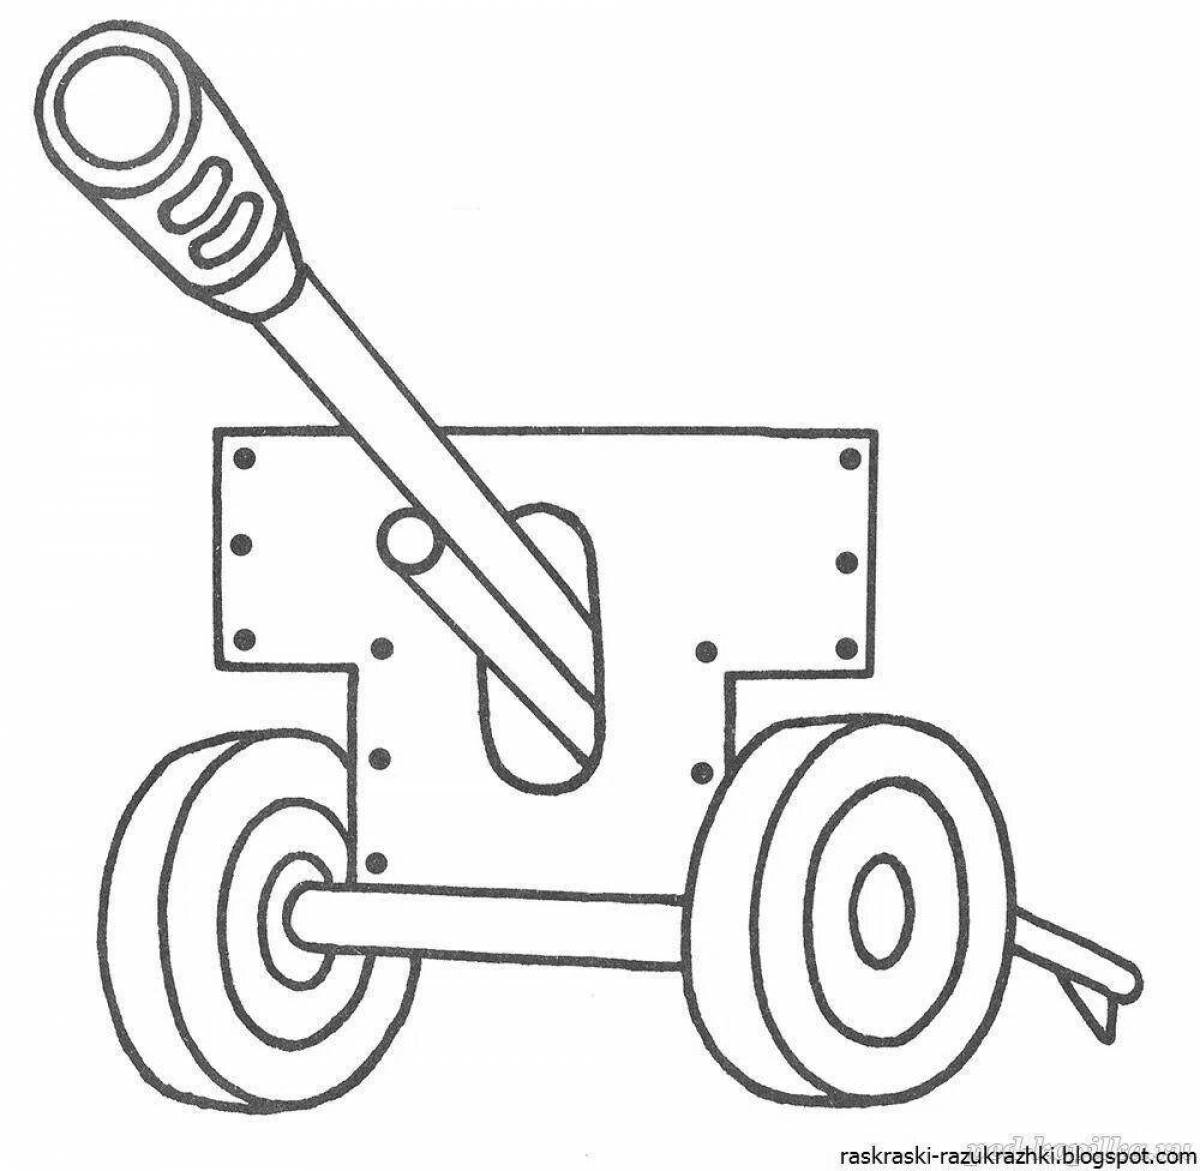 Colour-frenzy military equipment coloring pages for 3-4 year olds